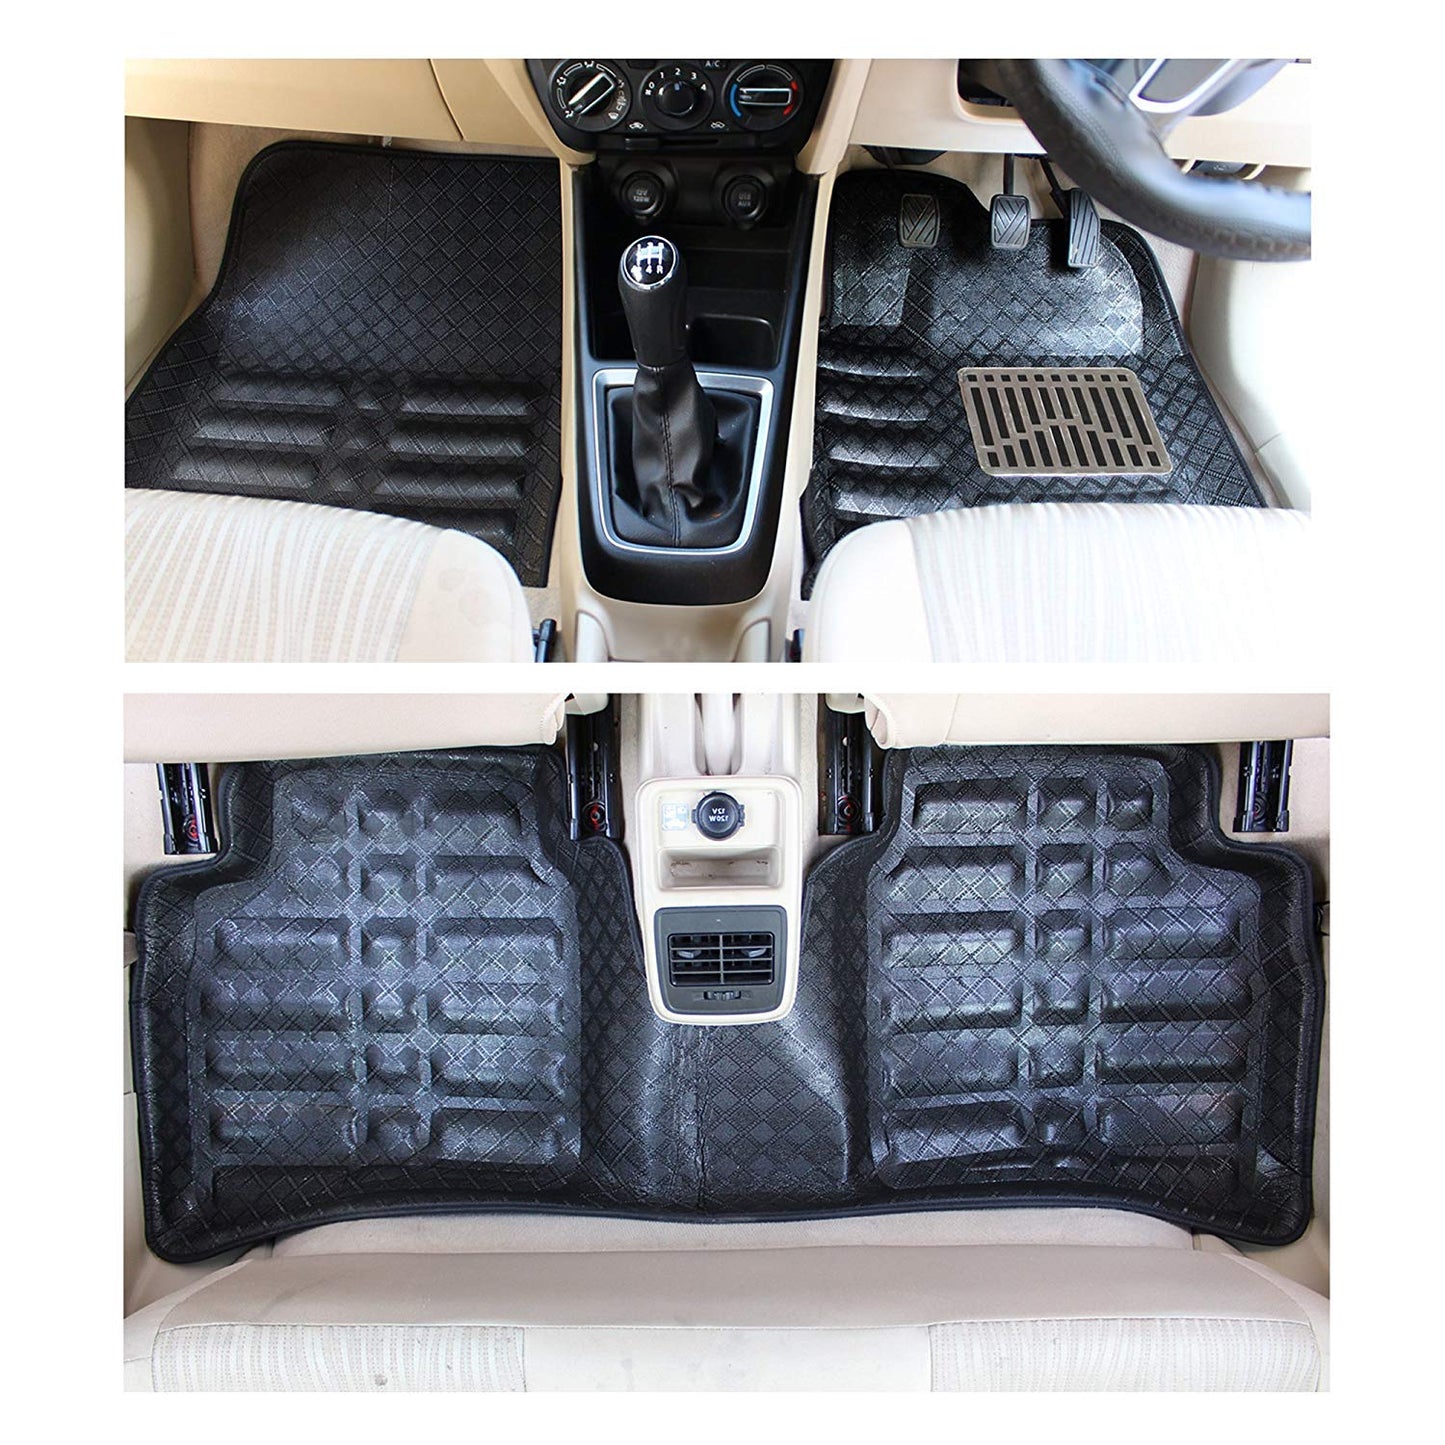 Oshotto 4D Artificial Leather Car Floor Mats For Toyota Innova - Set of 5 (Complete Mat with 3rd Row and Dicky) - Black